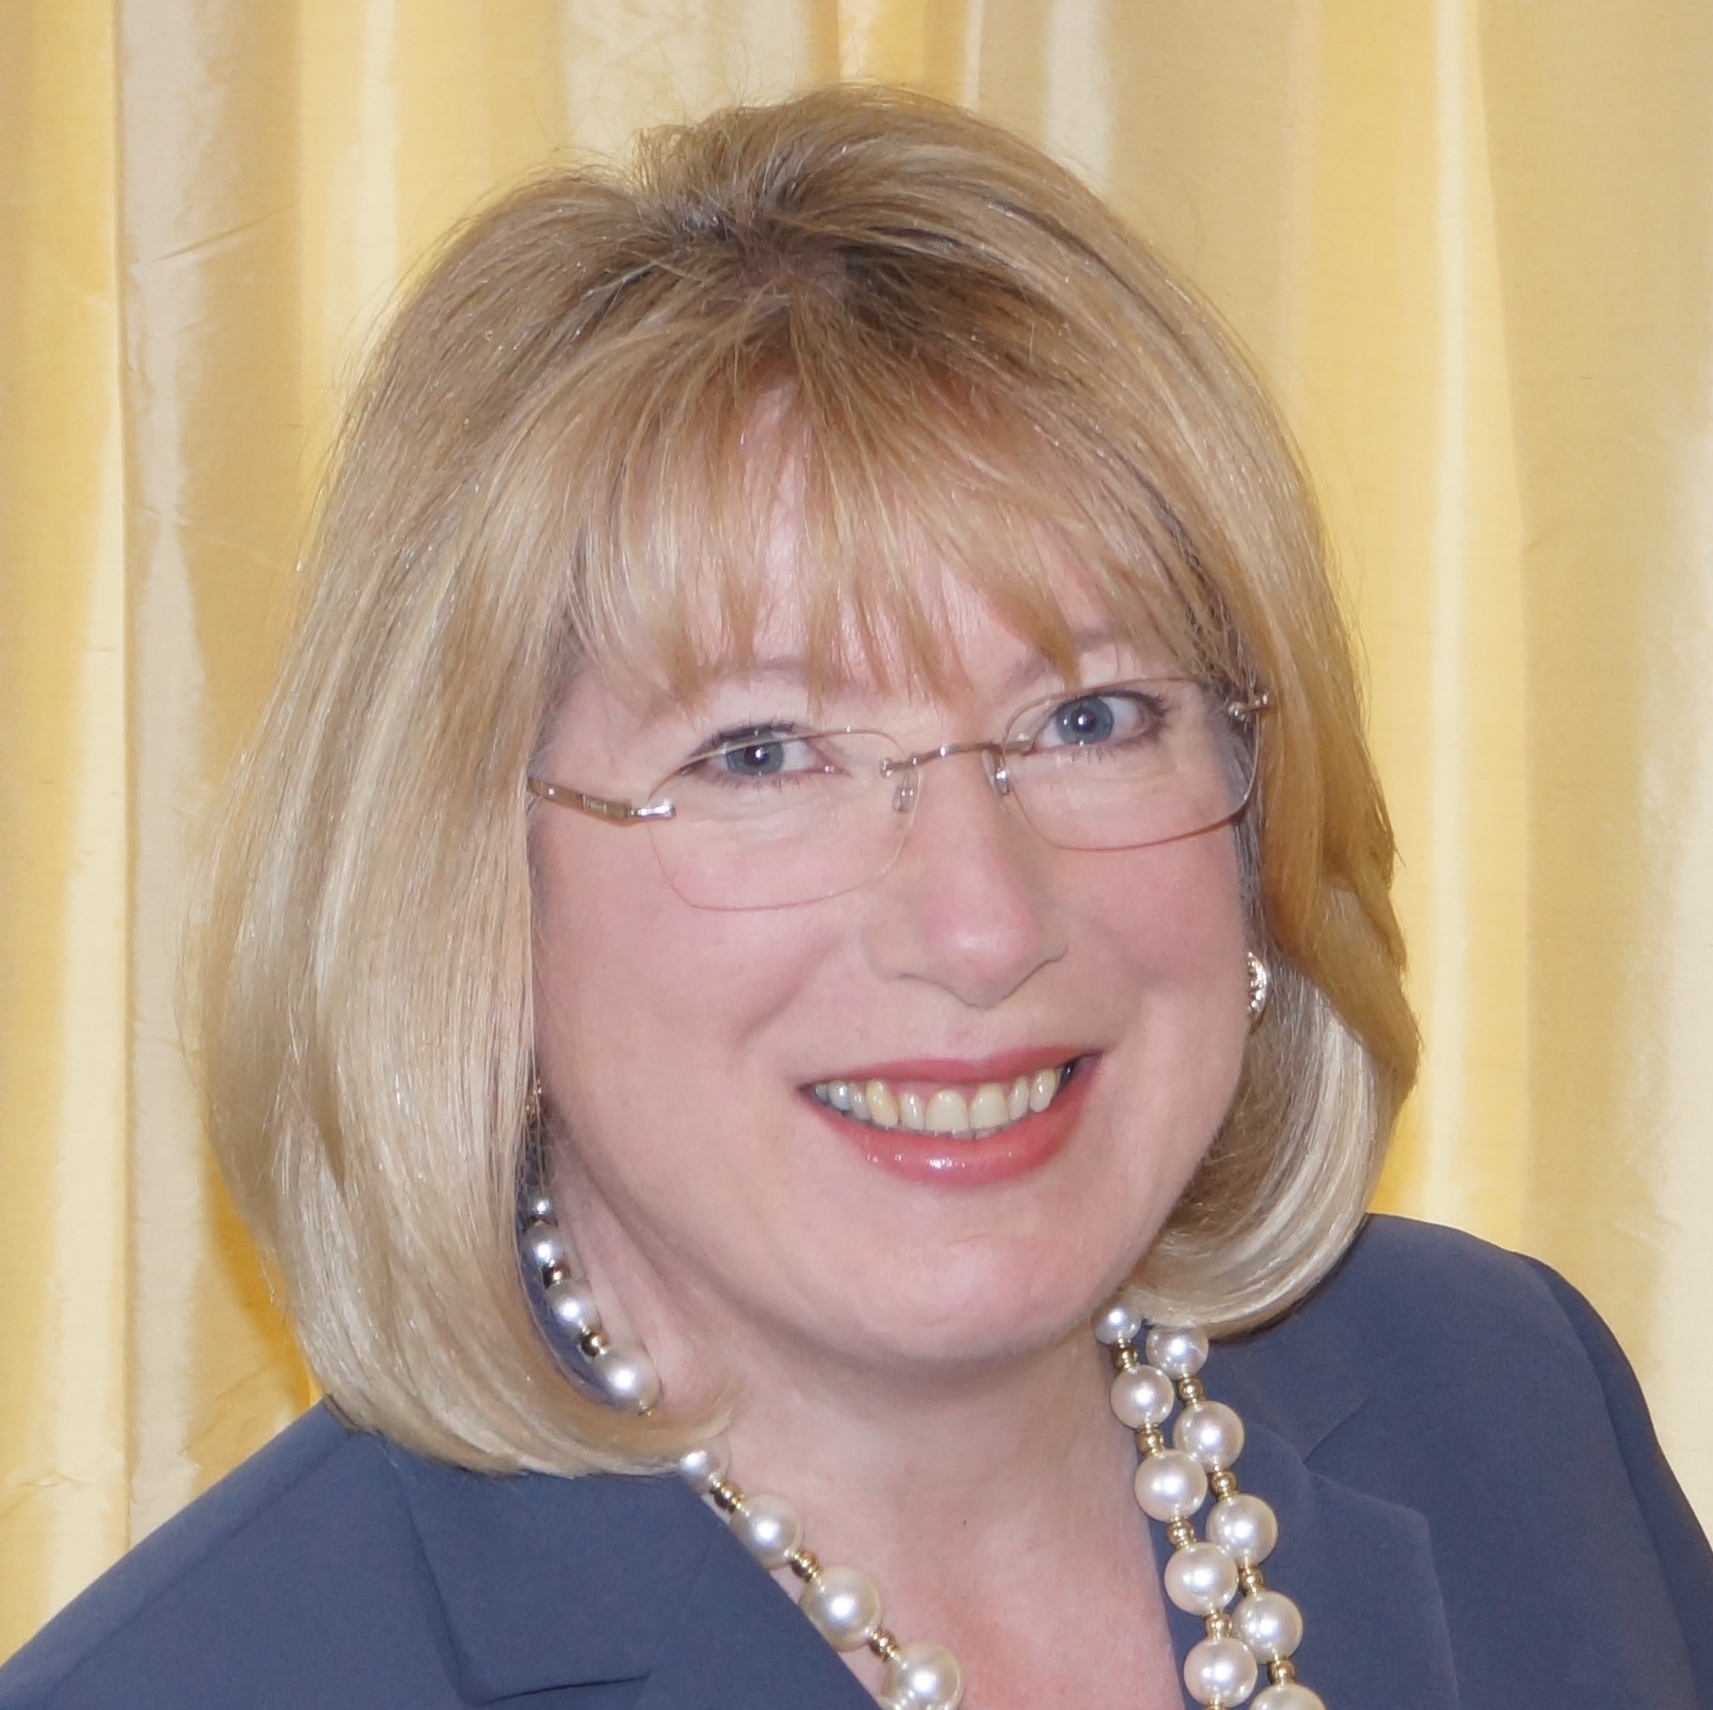 Carole Mills is the chief executive of Milton Keynes Council